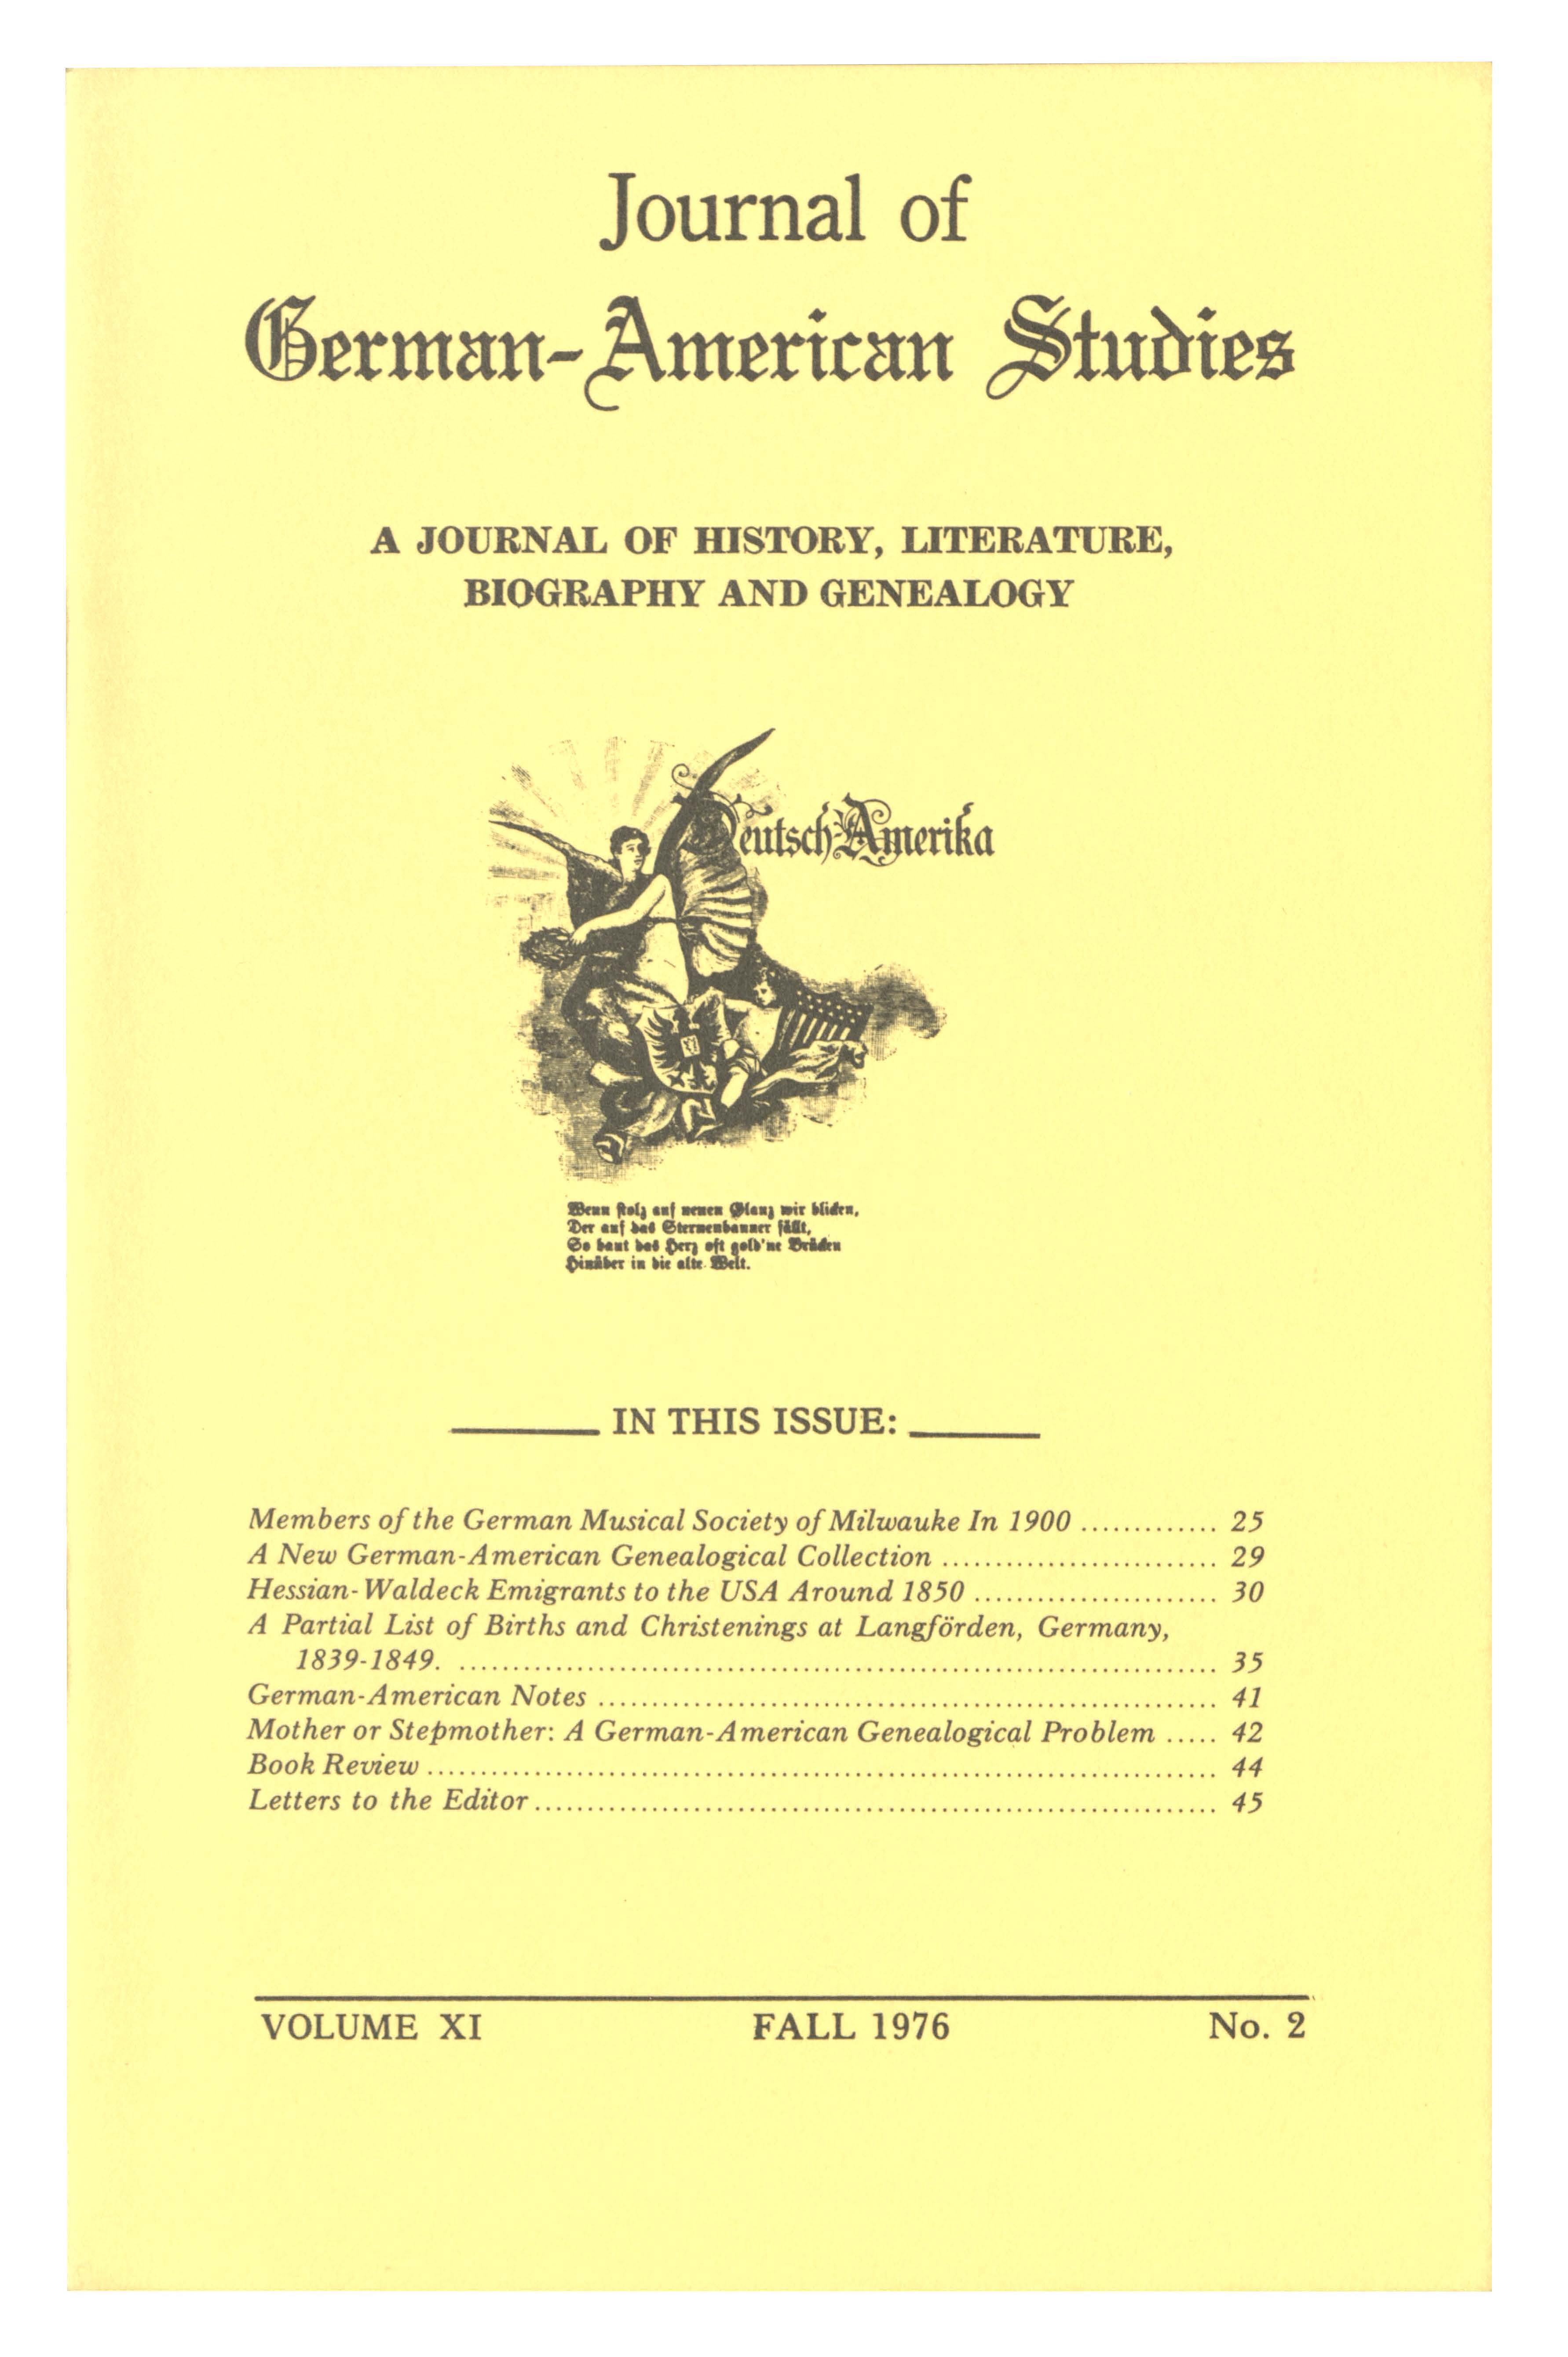 Cover of JGAS with yellow background and table of contents